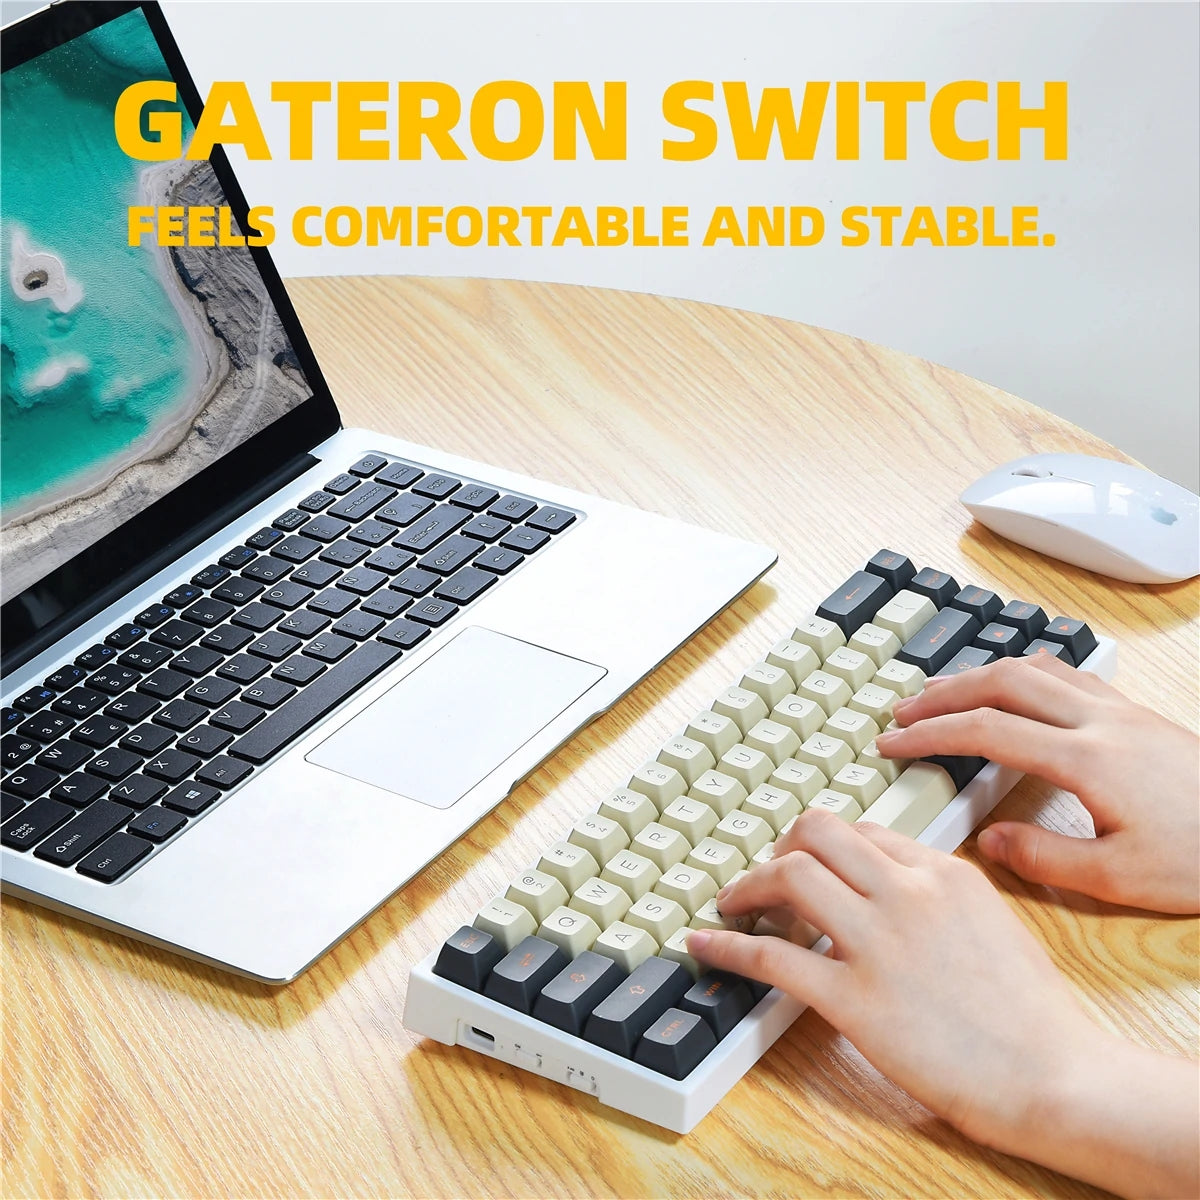 Experience comfort and stability with Gateron switches, providing an unparalleled typing experience.